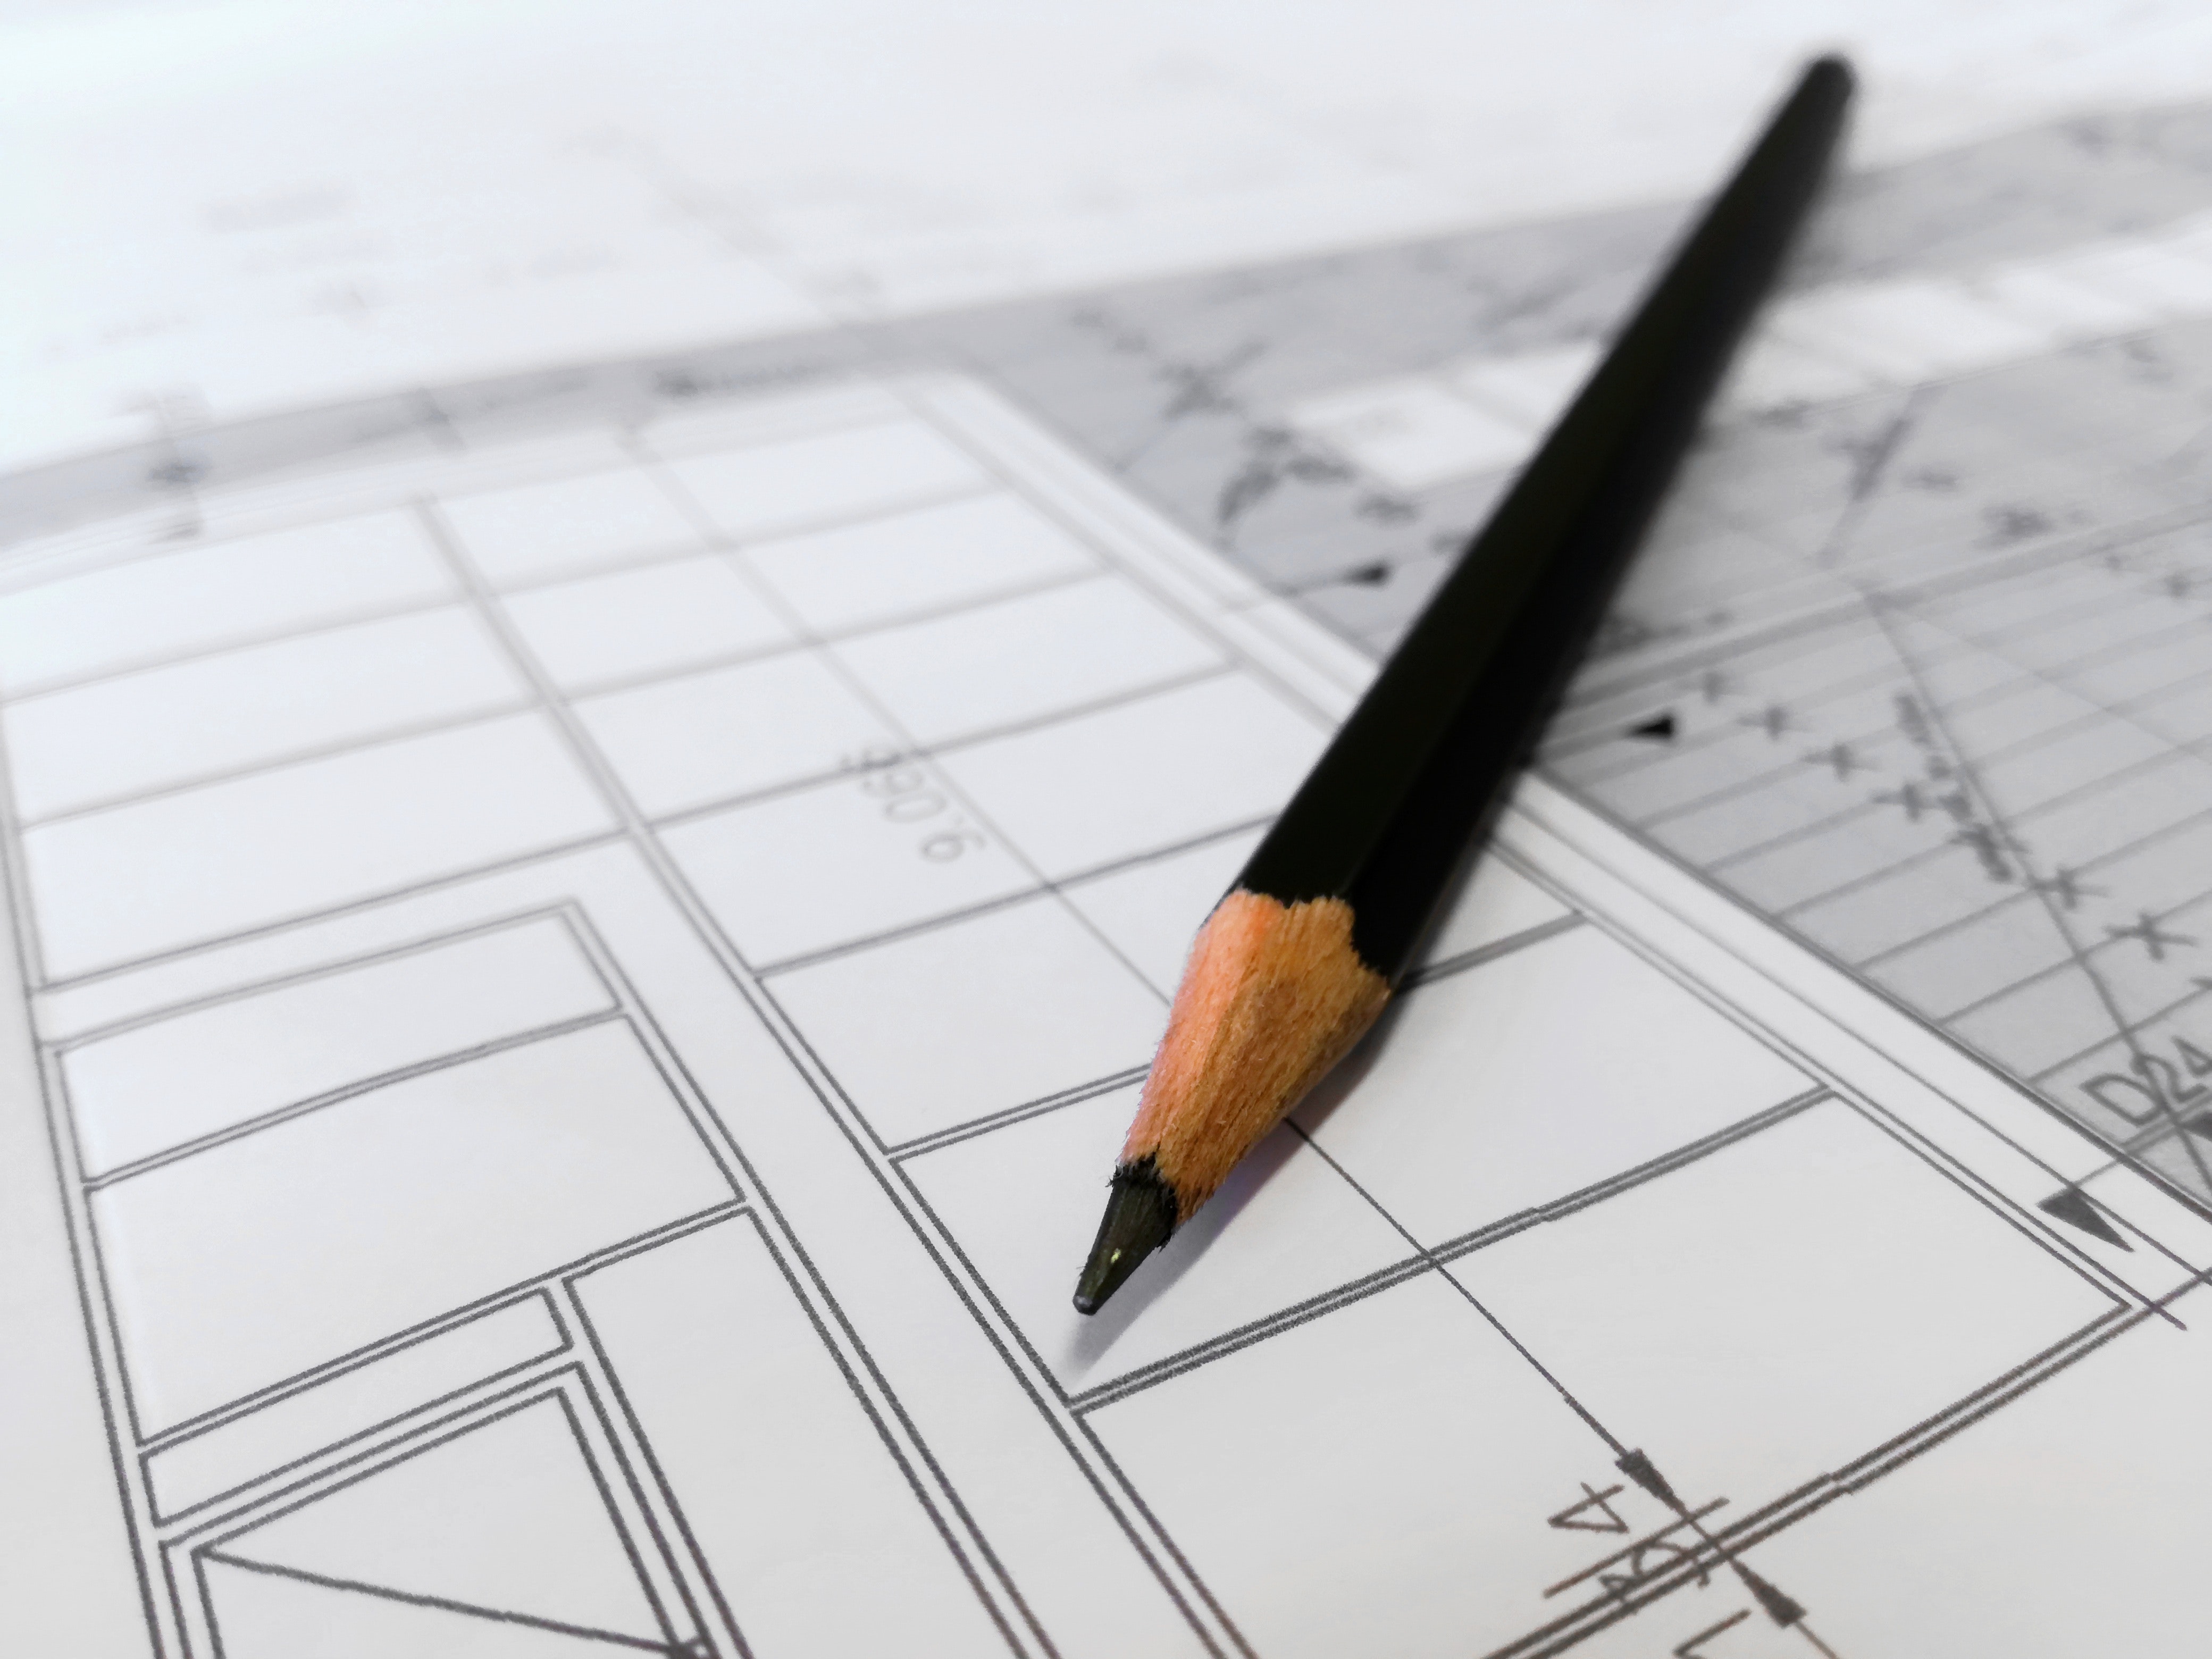 close-up view of a sharpened pencil laying on architecture plans